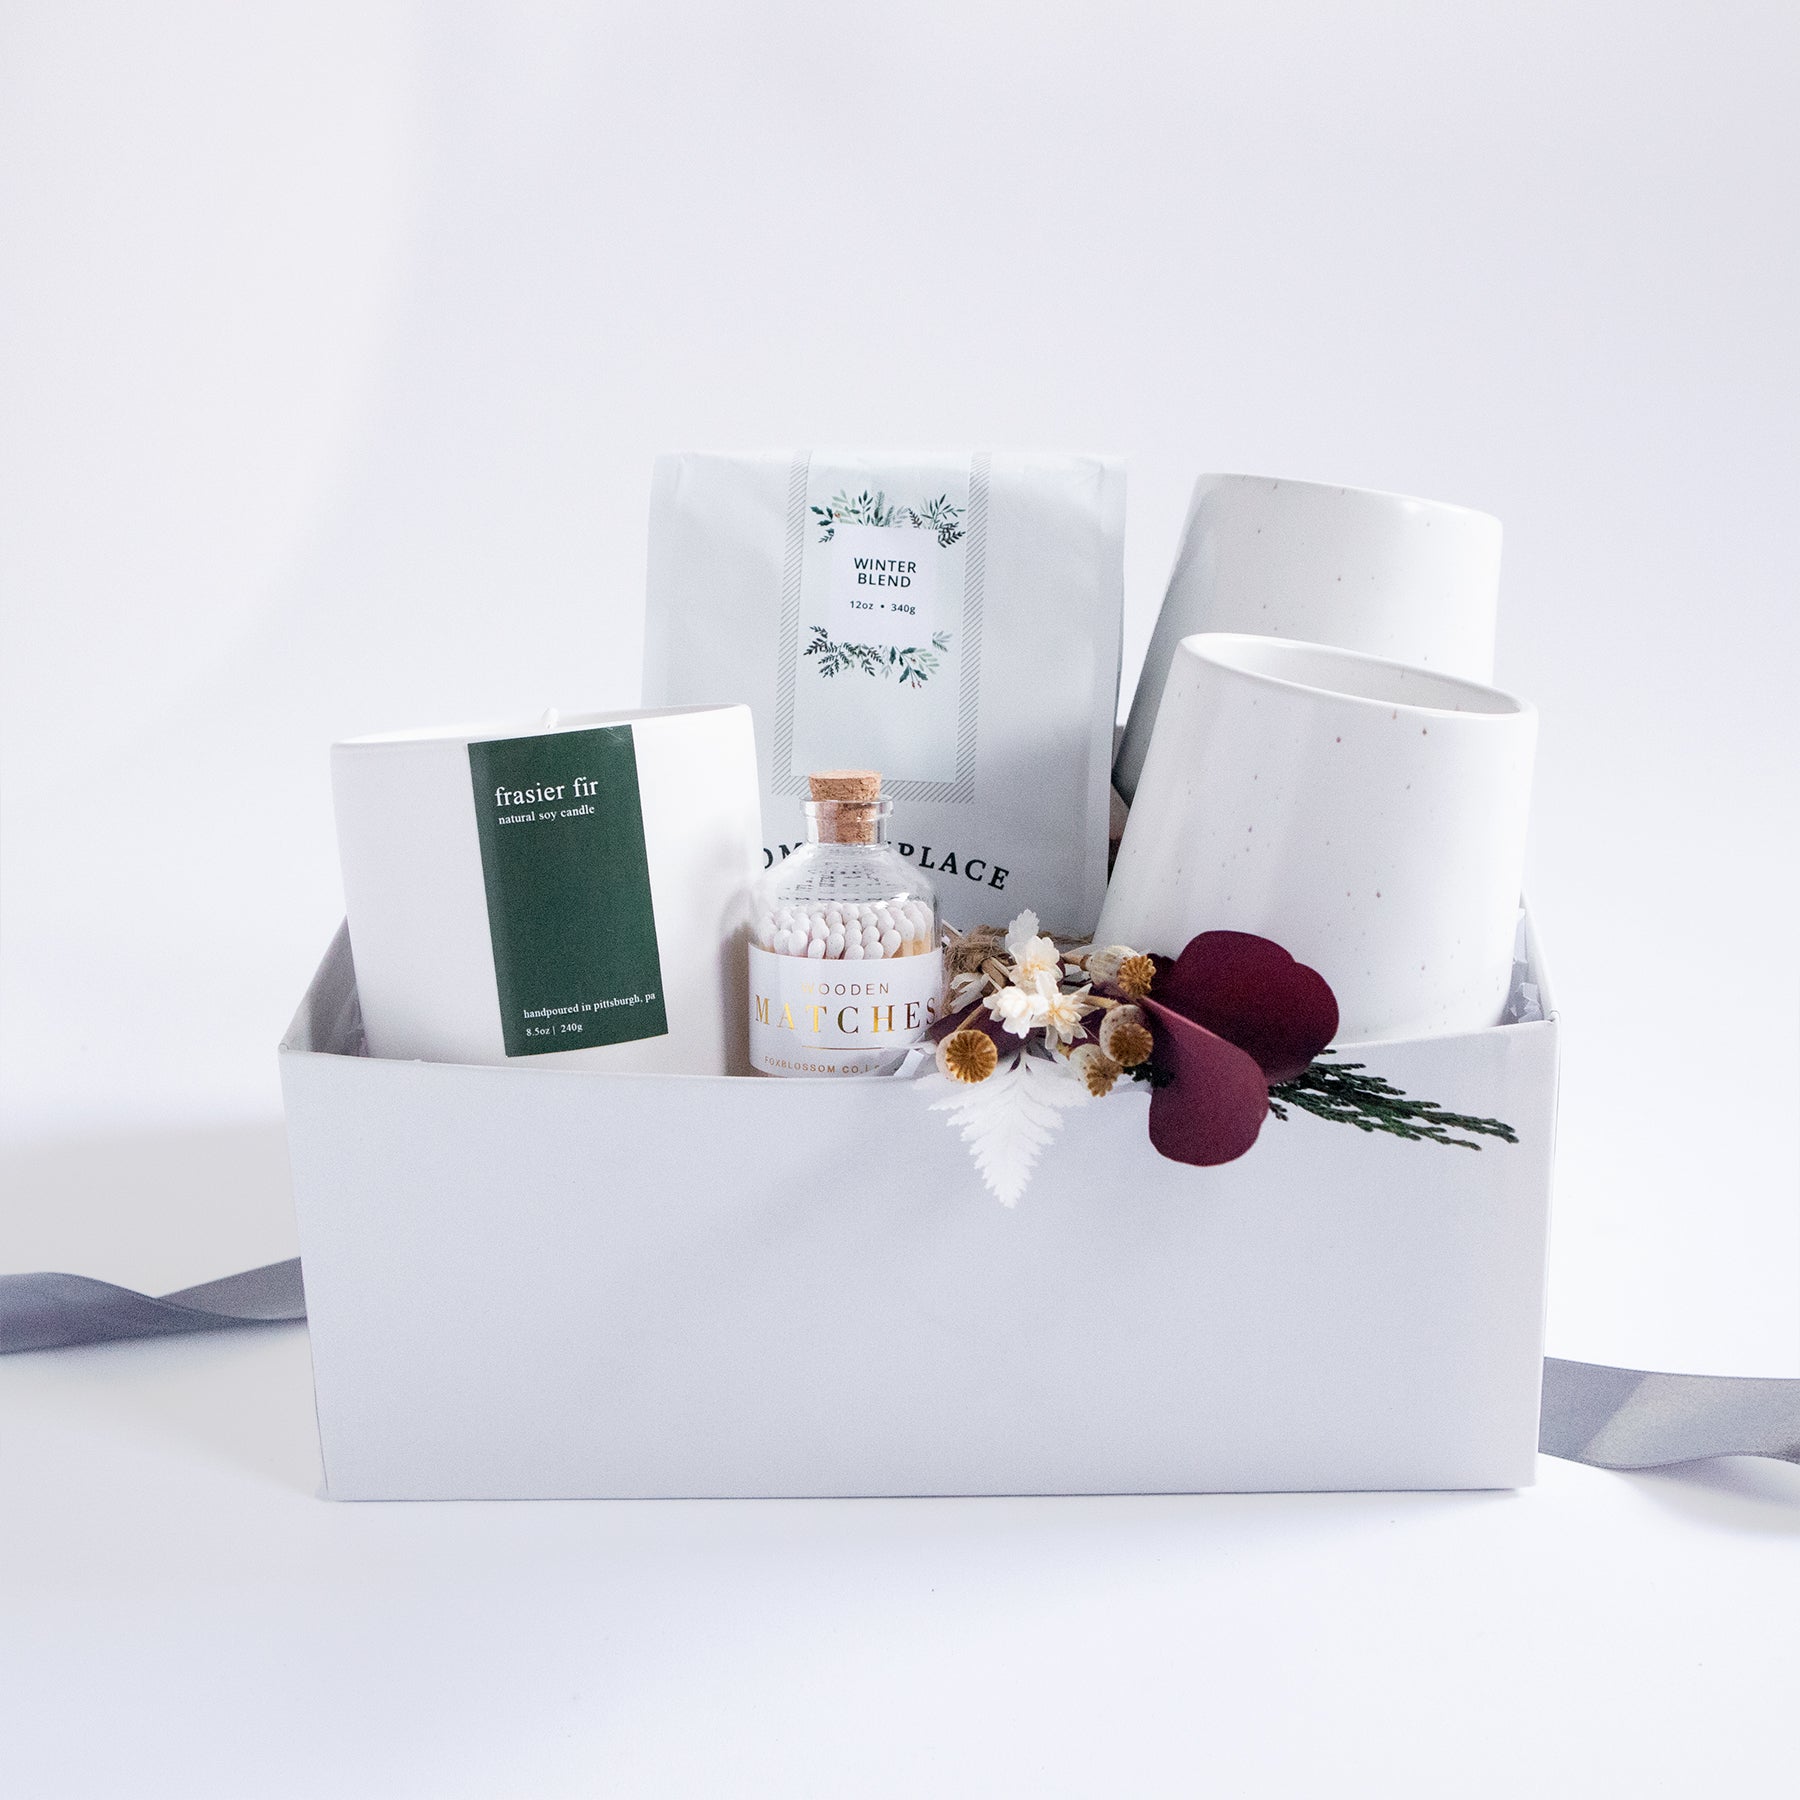 Curated Gift Boxes, Holiday Gift Boxes, Relax and Restore Gift, Pamper Spa Gifts, Tea Time Gift Box, Build a Gift Box, Corporate Gifts, Client Gifting